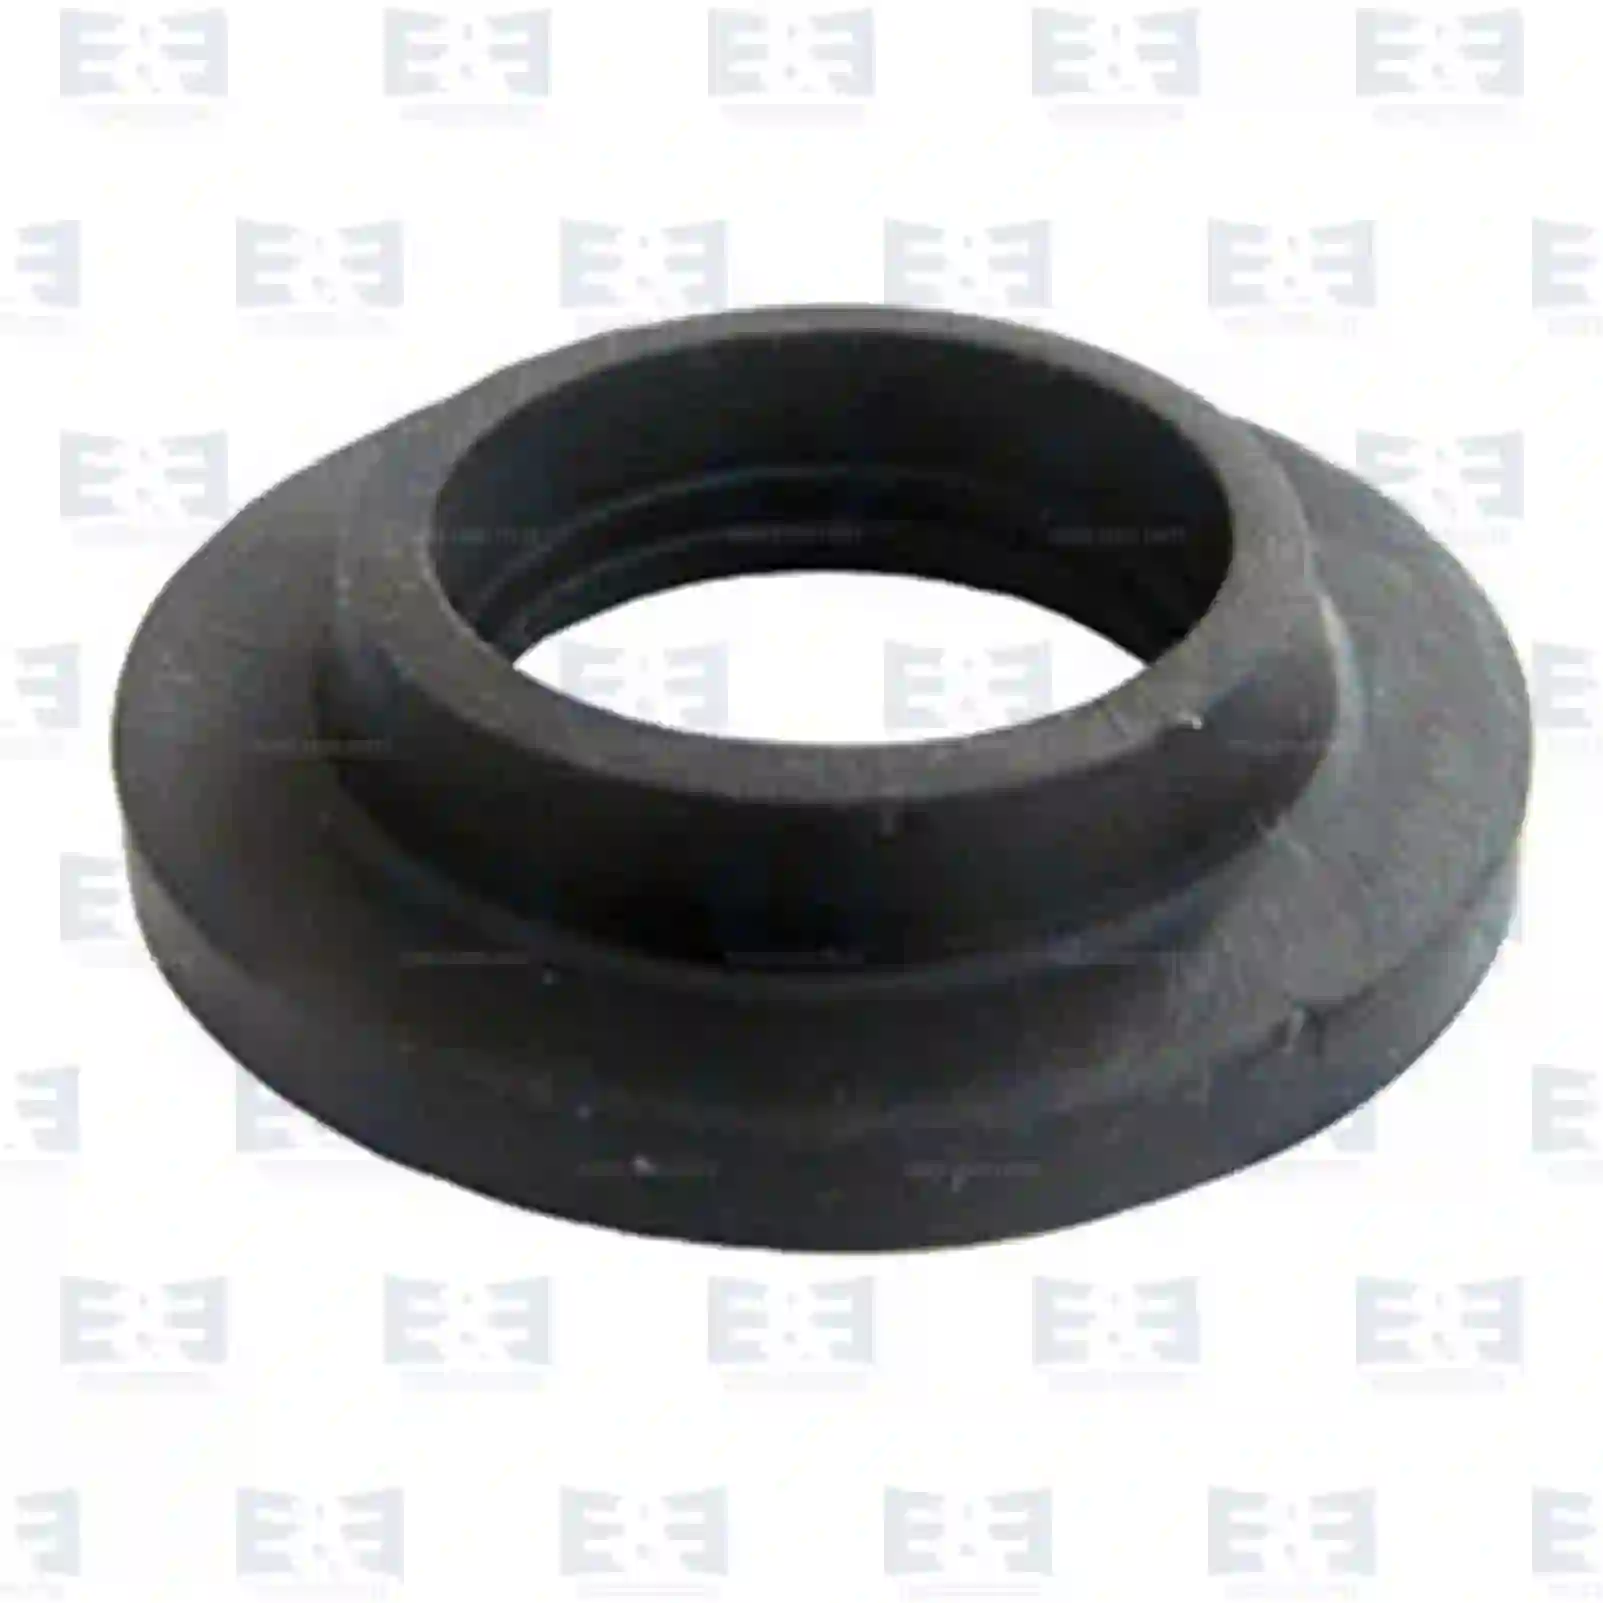 Compressed Air Rubber, palm coupling, EE No 2E2286243 ,  oem no:0183604, 183604, 81511320003, 81512706001, 0004290327, 0004292184, 0004292484 E&E Truck Spare Parts | Truck Spare Parts, Auotomotive Spare Parts